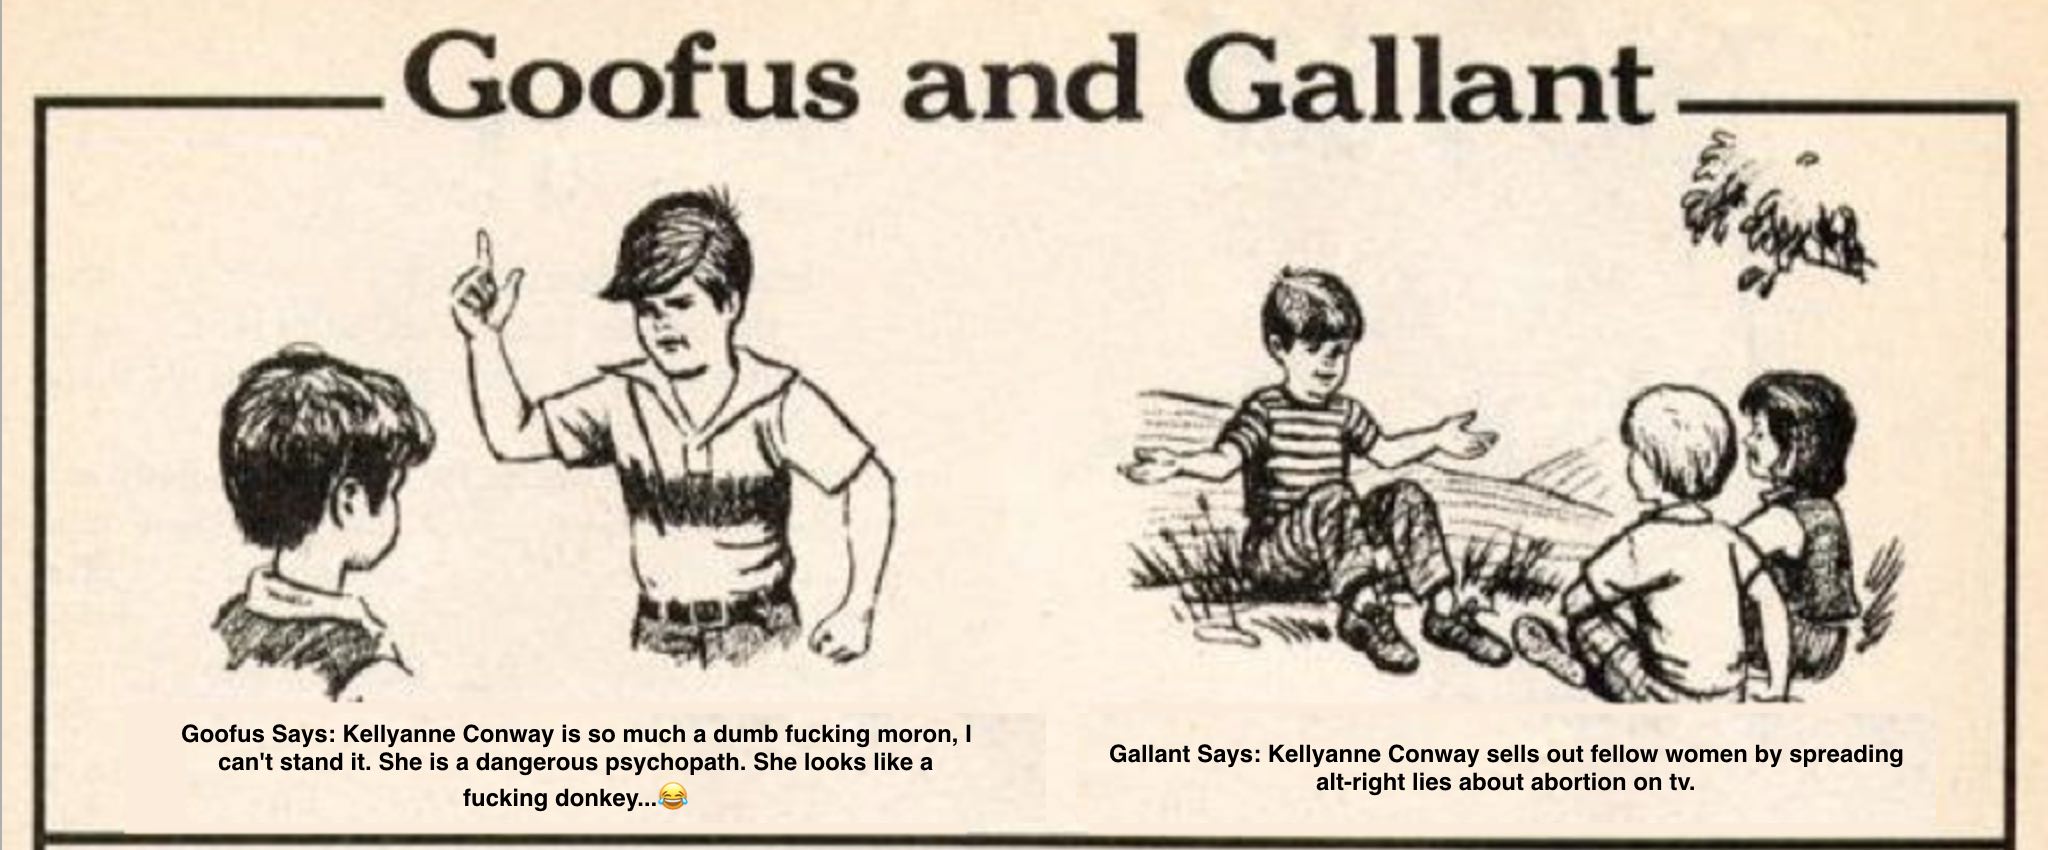 Goofus Says: Kellyanne Conway is so much a dumb fucking moron, I can't stand it. She is a dangerous psychopath. She looks like a fucking donkey...? Gallant Says: Kellyanne Conway sells out fellow women by spreading alt-right lies about abortion on tv.